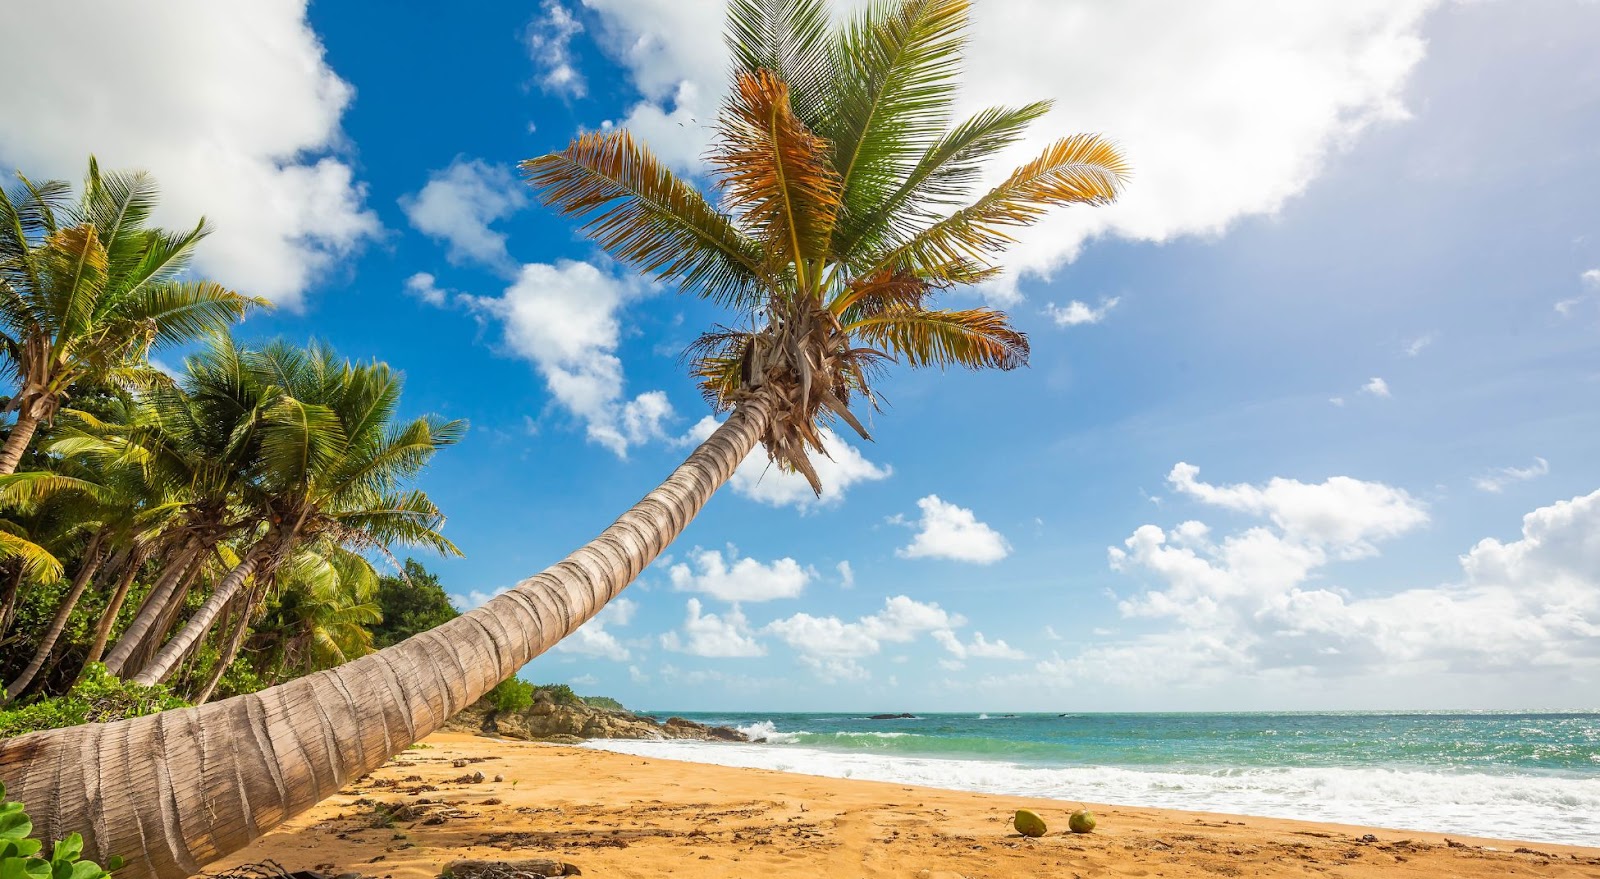 Sunny Caribbean shore with palm trees and golden sand